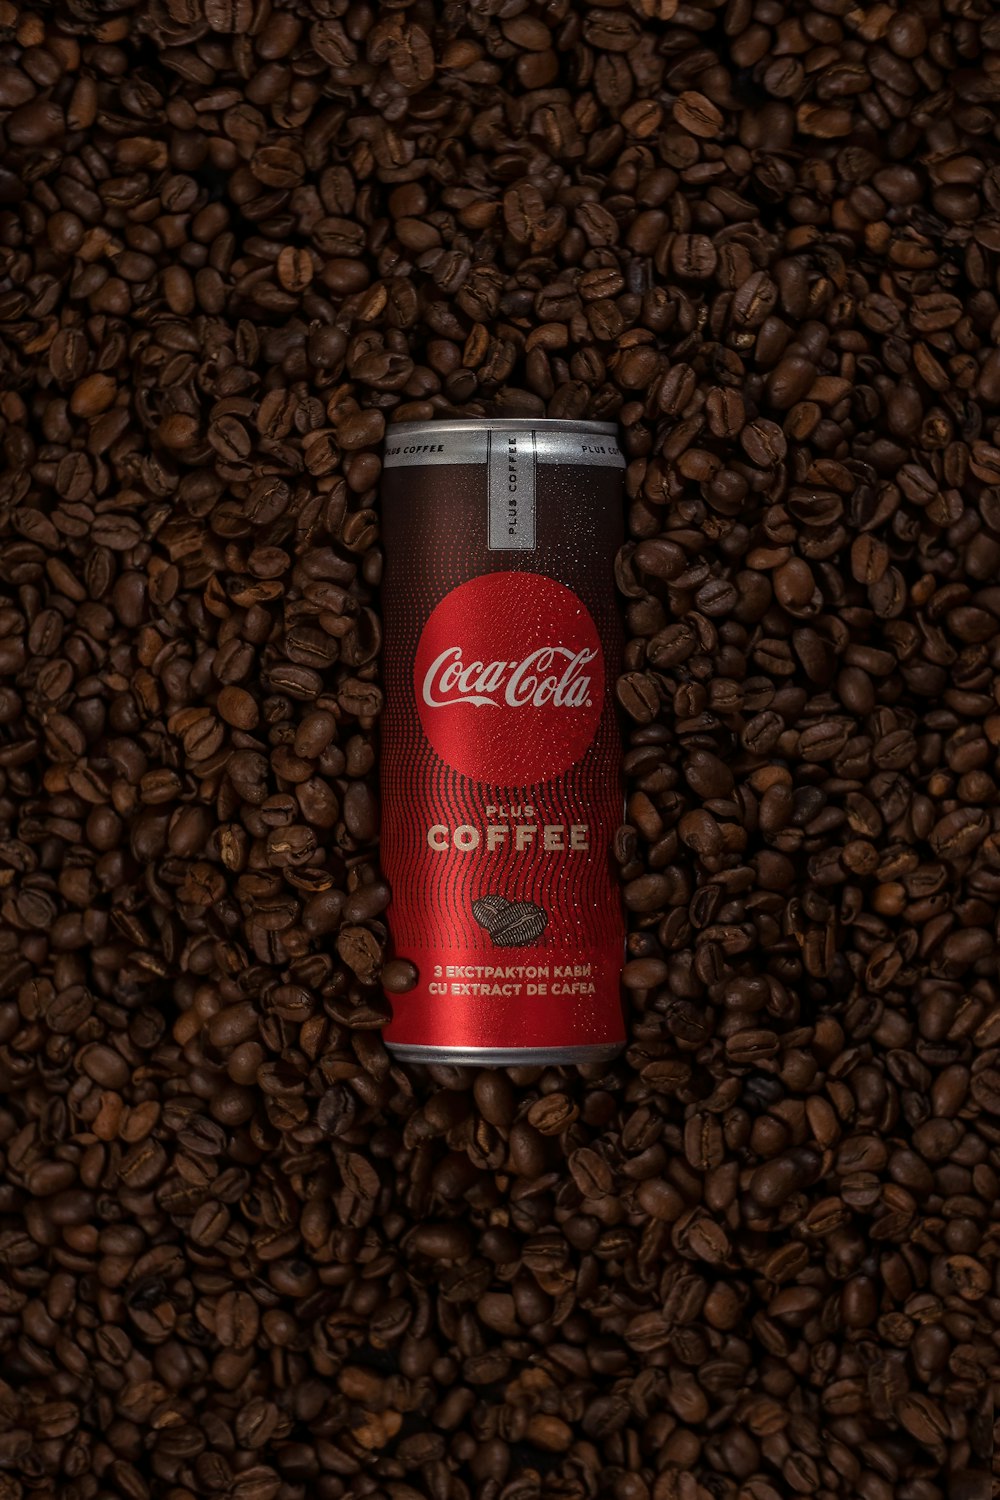 red coca cola can on brown coffee beans